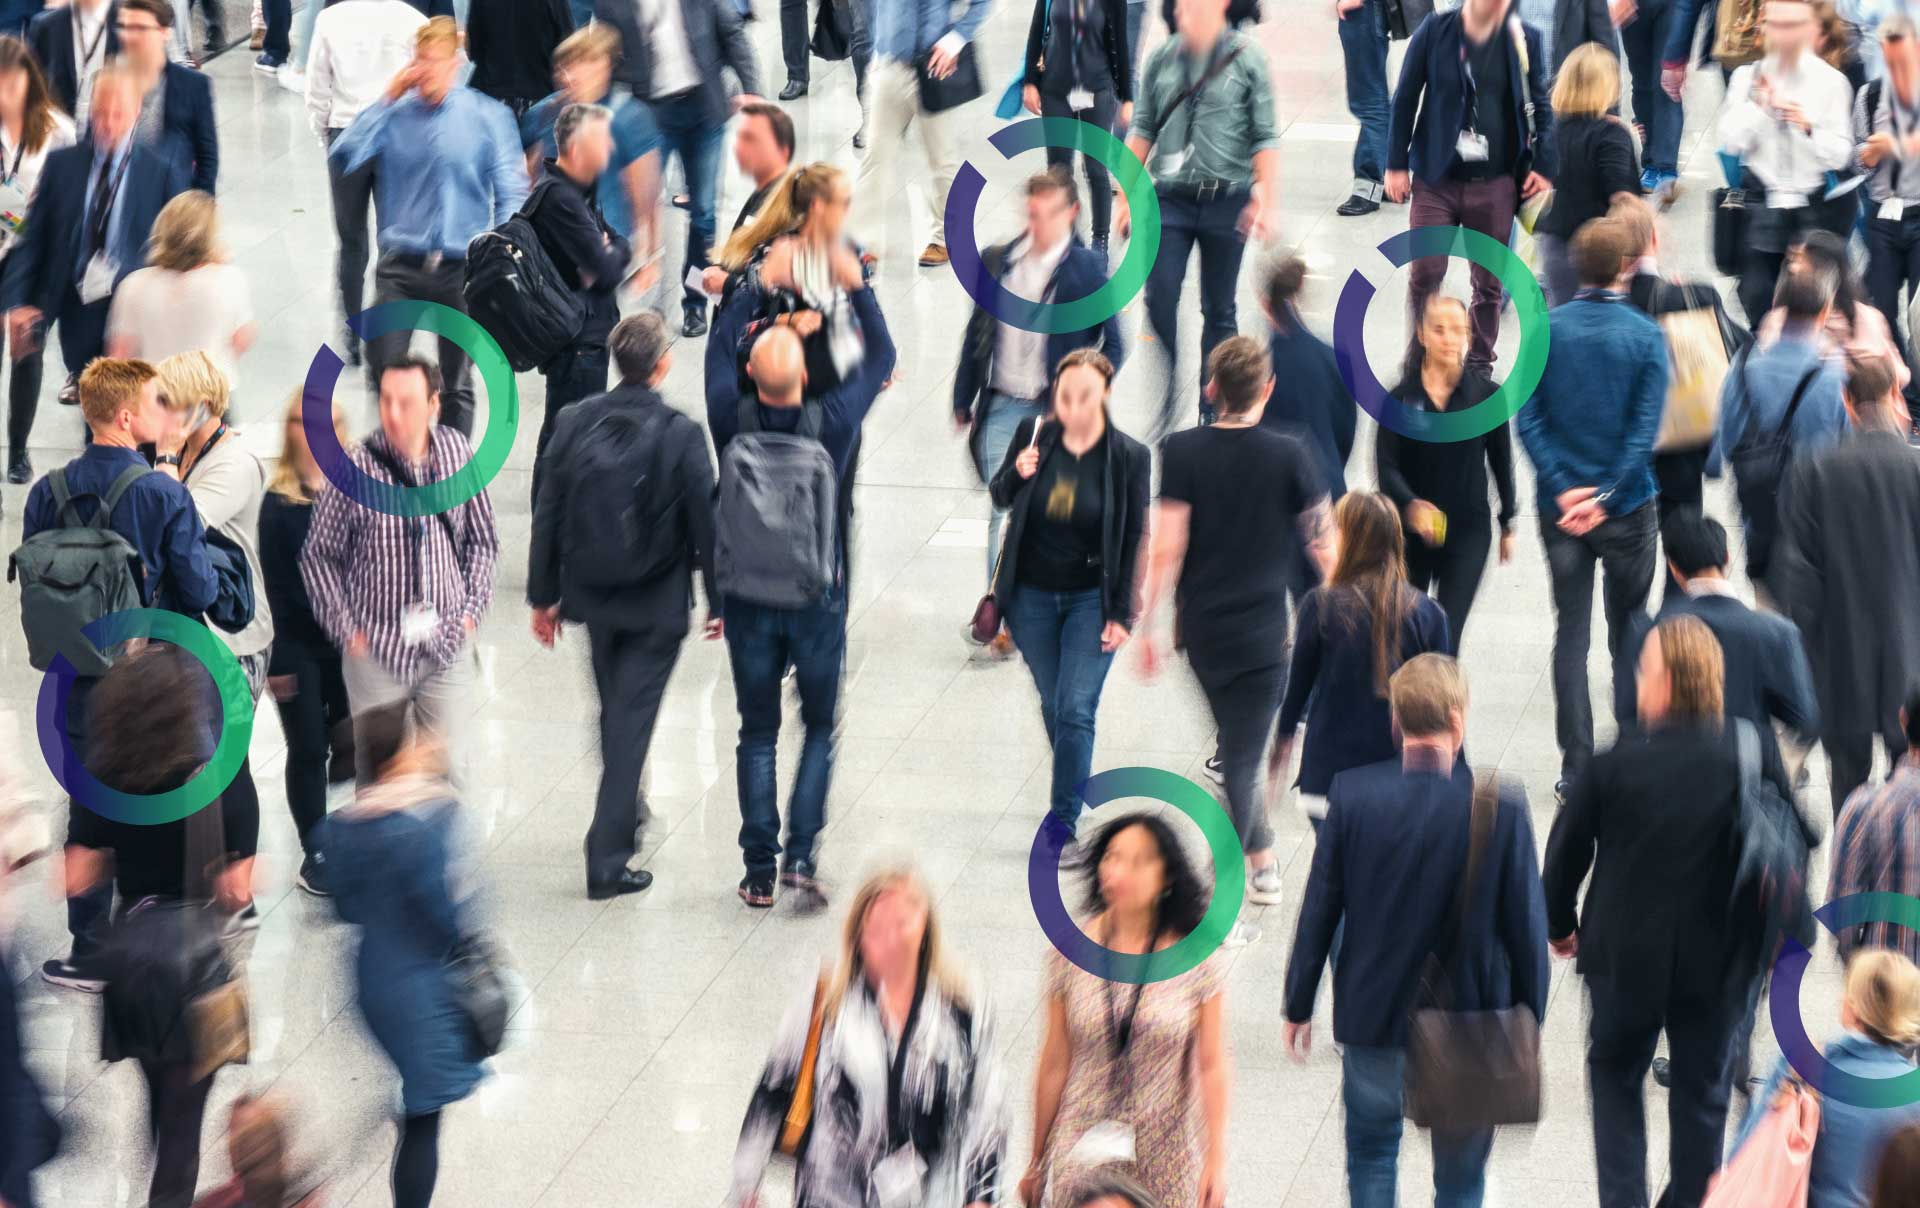 A crowd of people walking on the sidewalk. Some have Outseer logo circles around their faces to represent facial recognition.